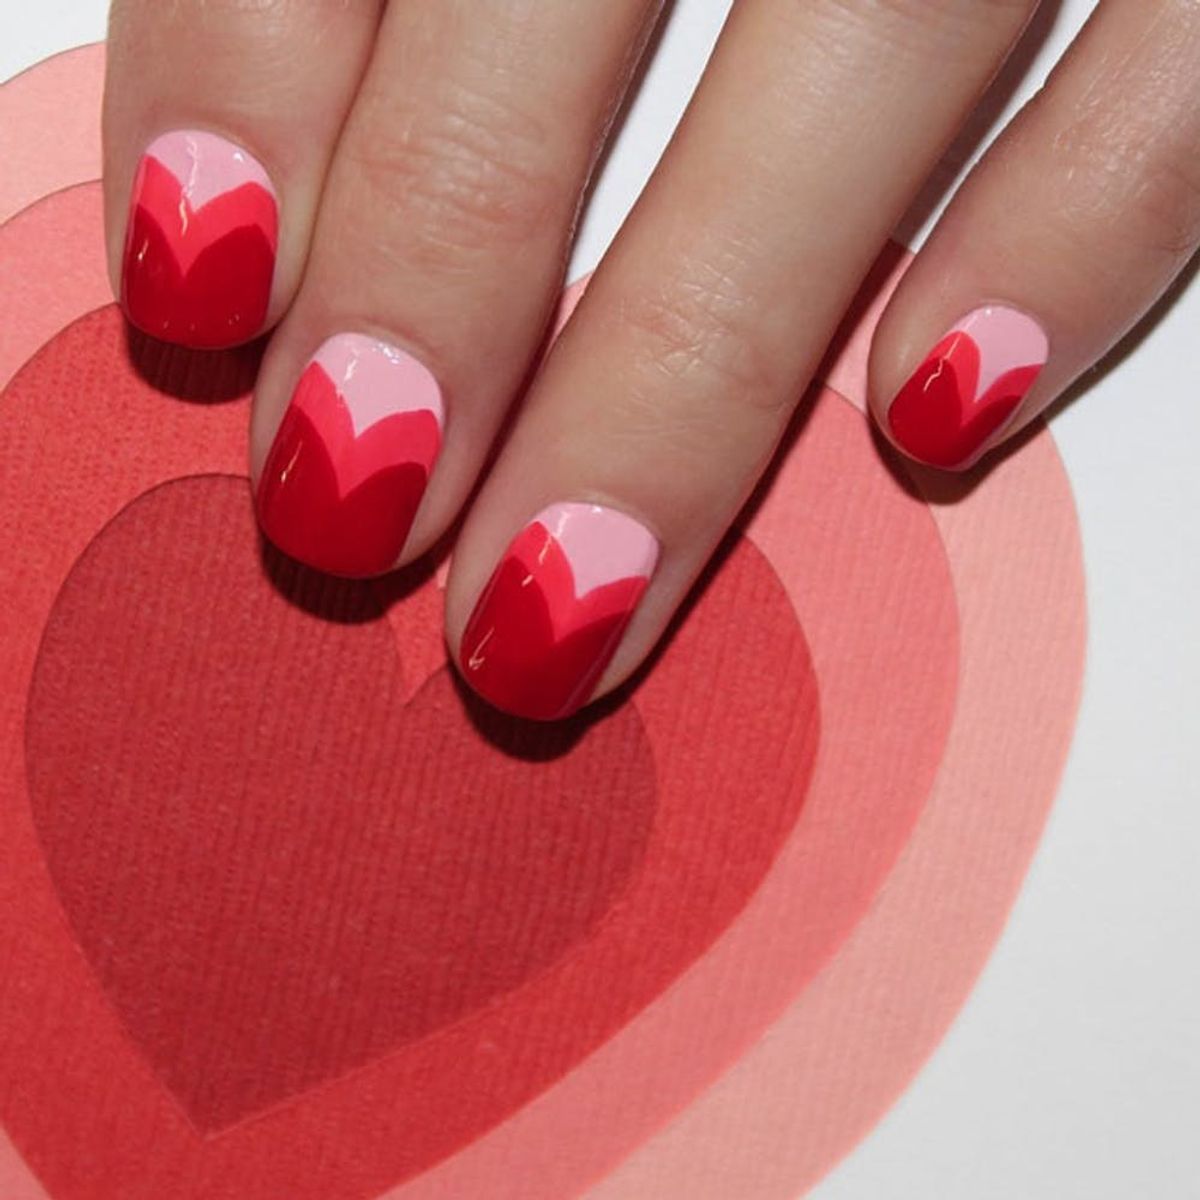 16 Valentine’s Day Nail Art Designs You’ll Heart